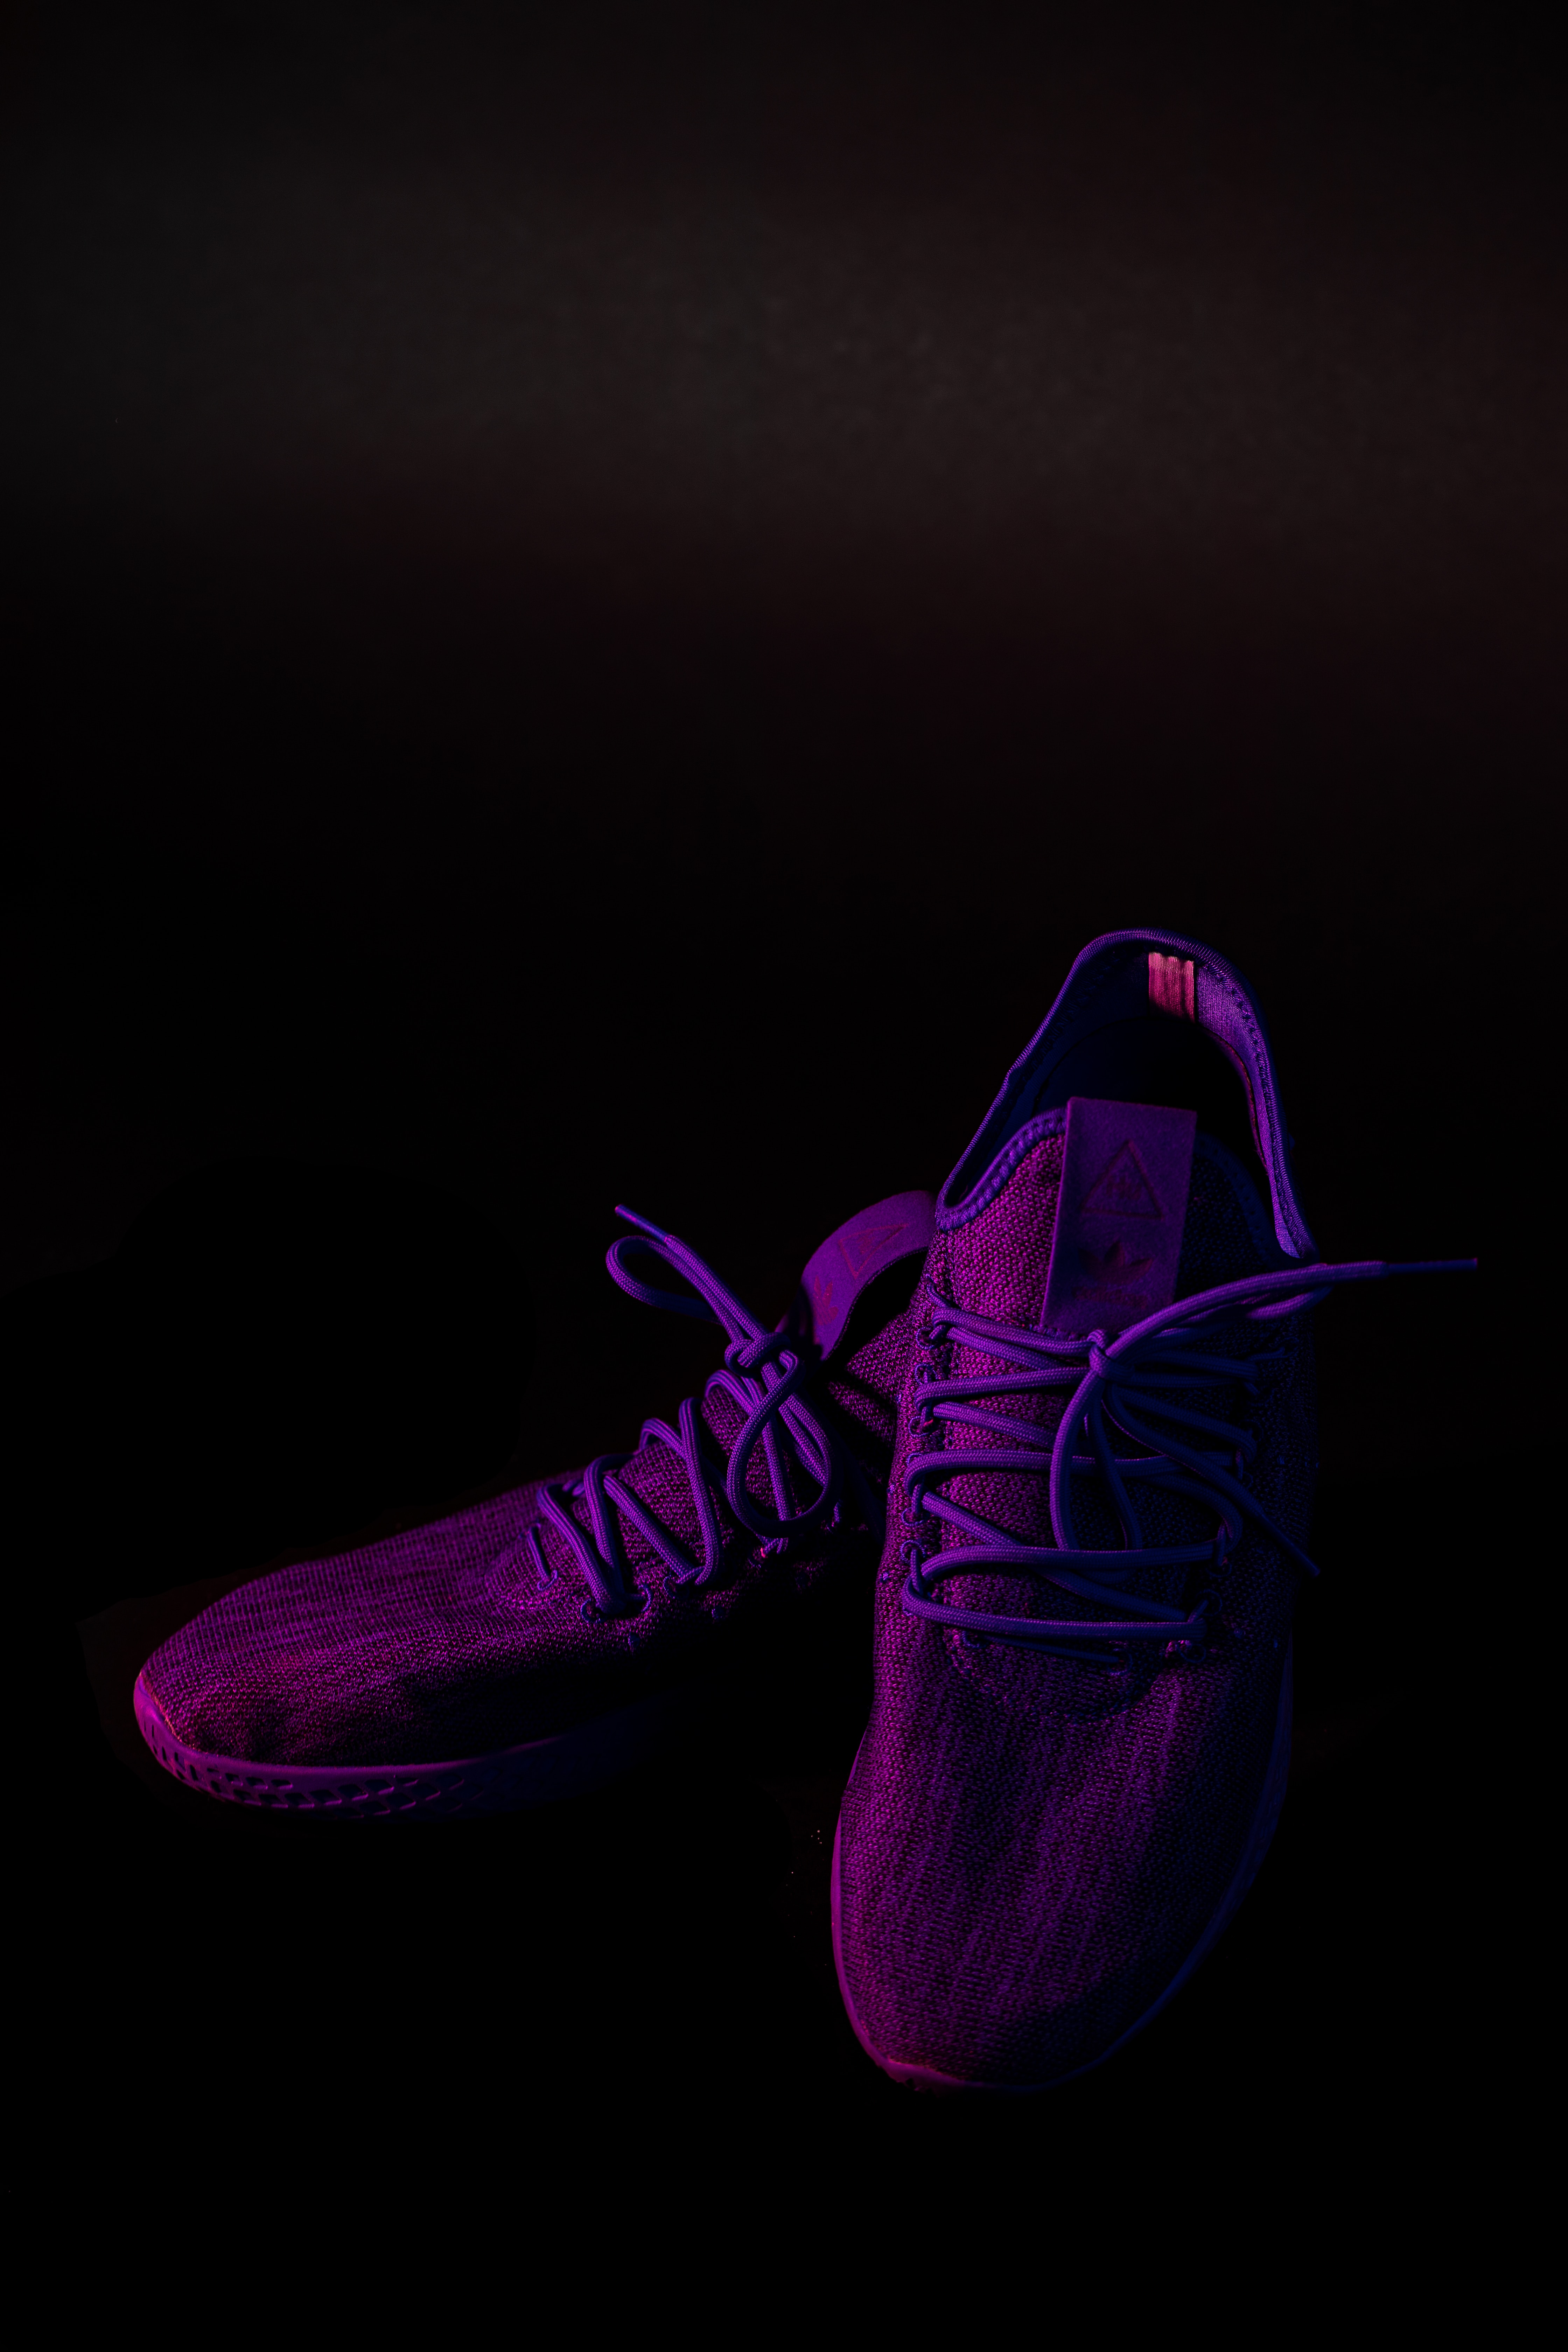 Wallpaper Purple and Black Nike Athletic Shoes, Background Free Image